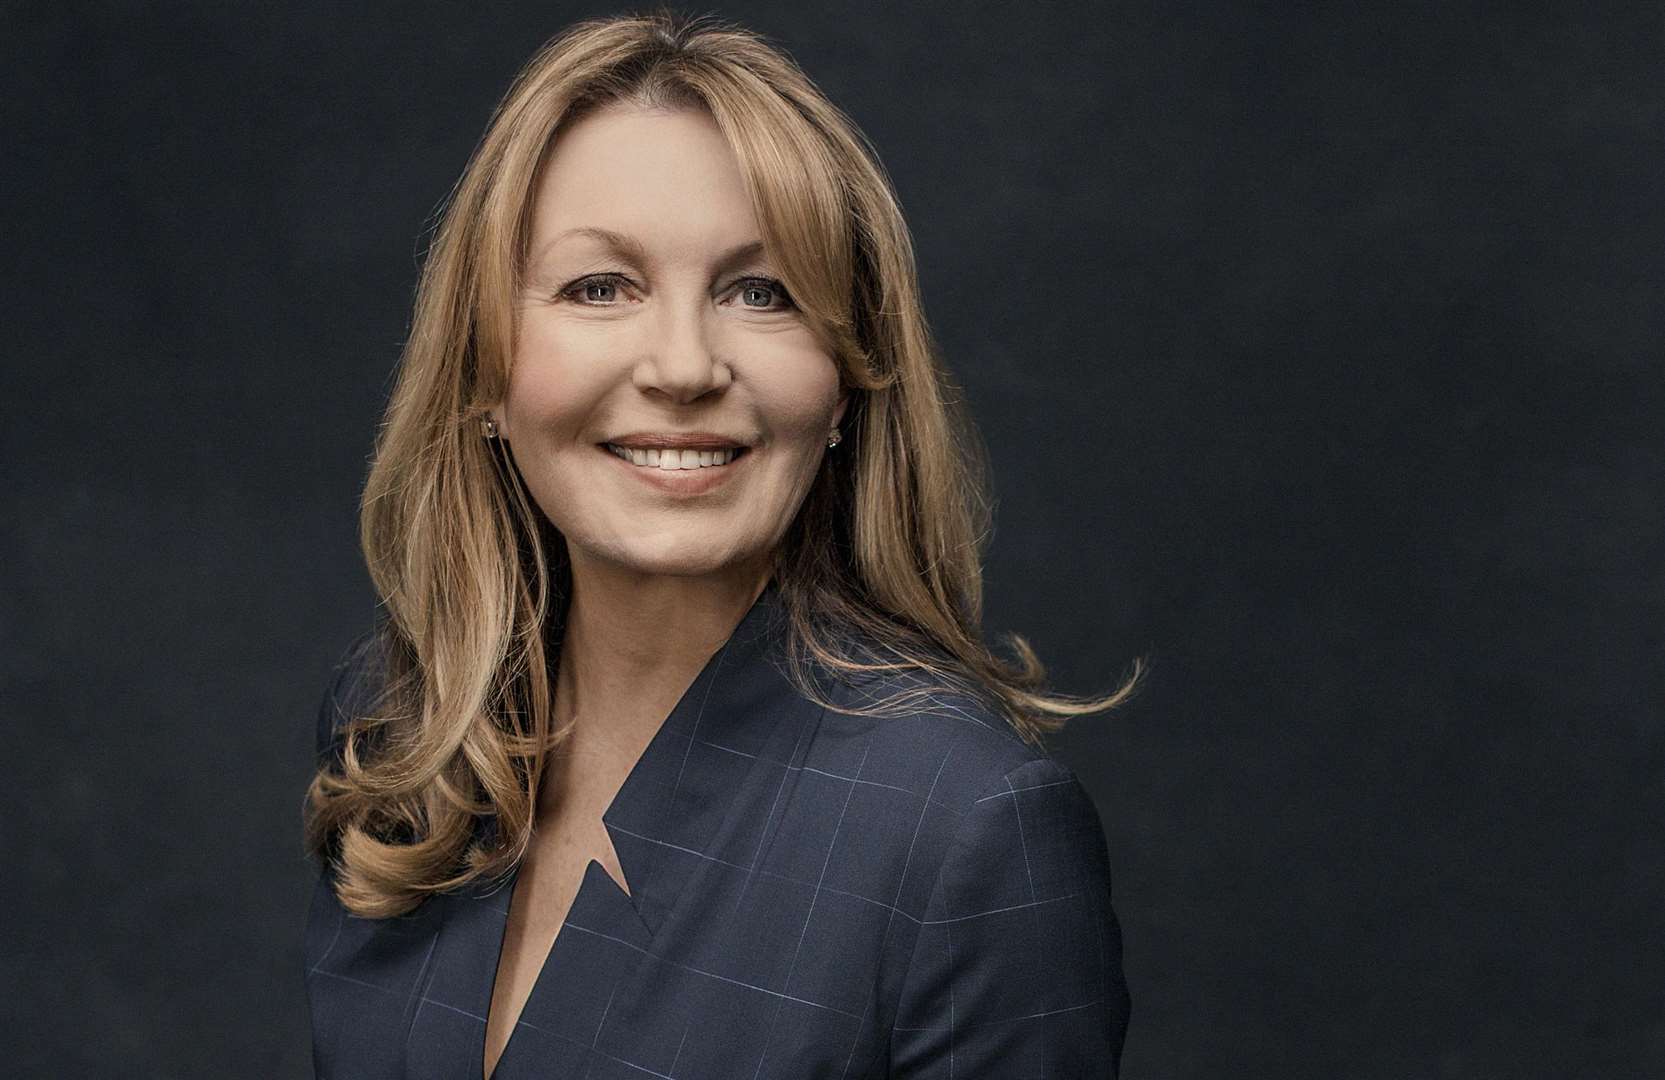 Kirsty Young will be part of the team leading the coverage for BBC One